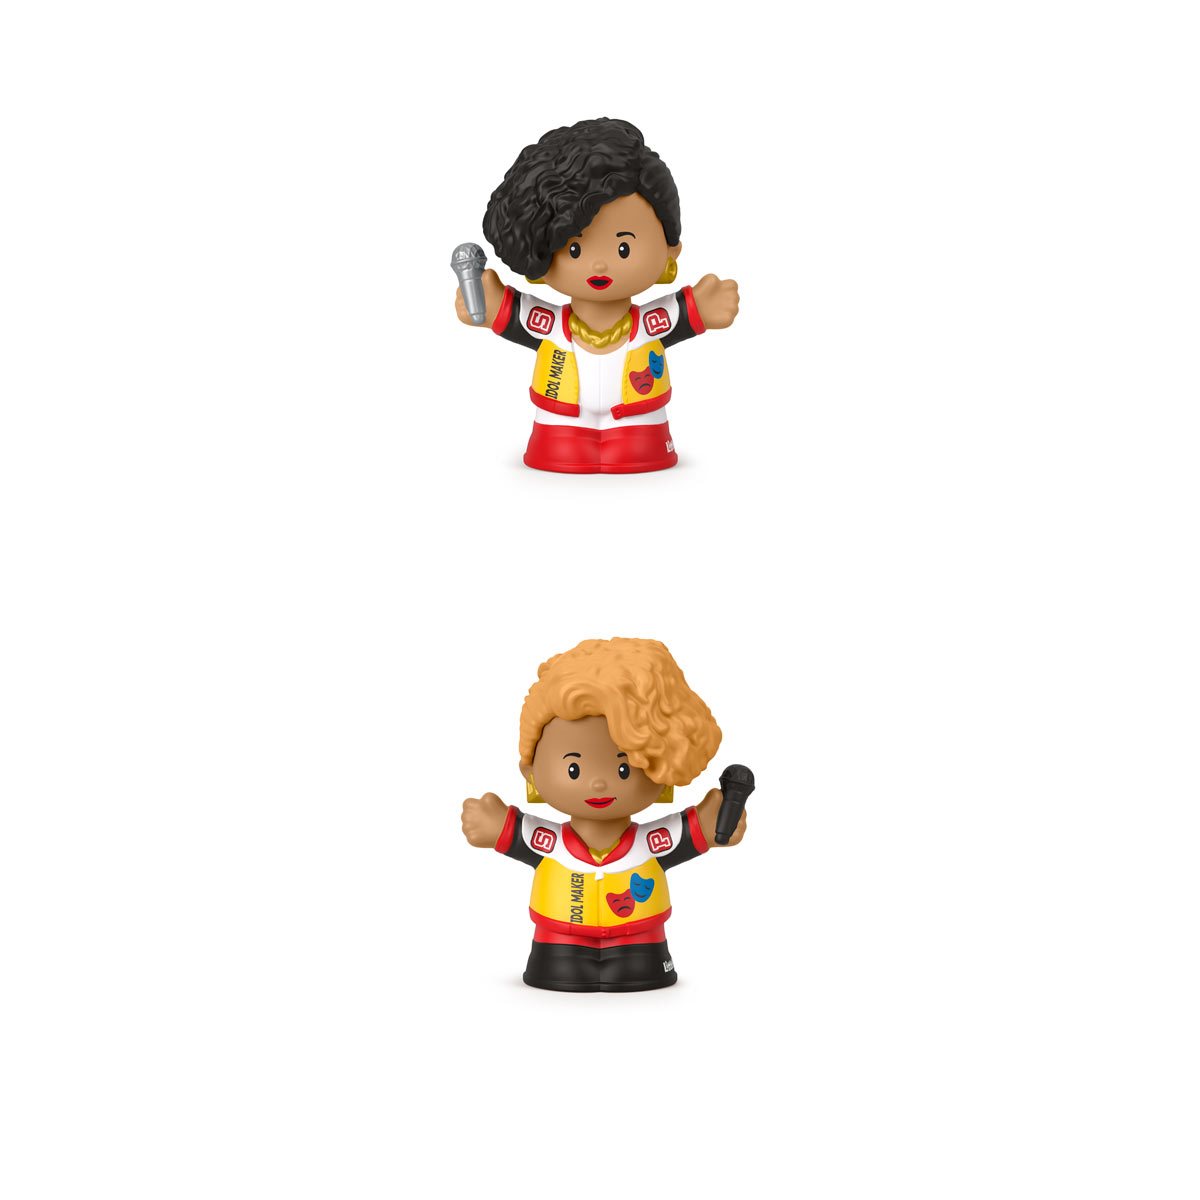  Little People Collector Salt-N-Pepa Special Edition